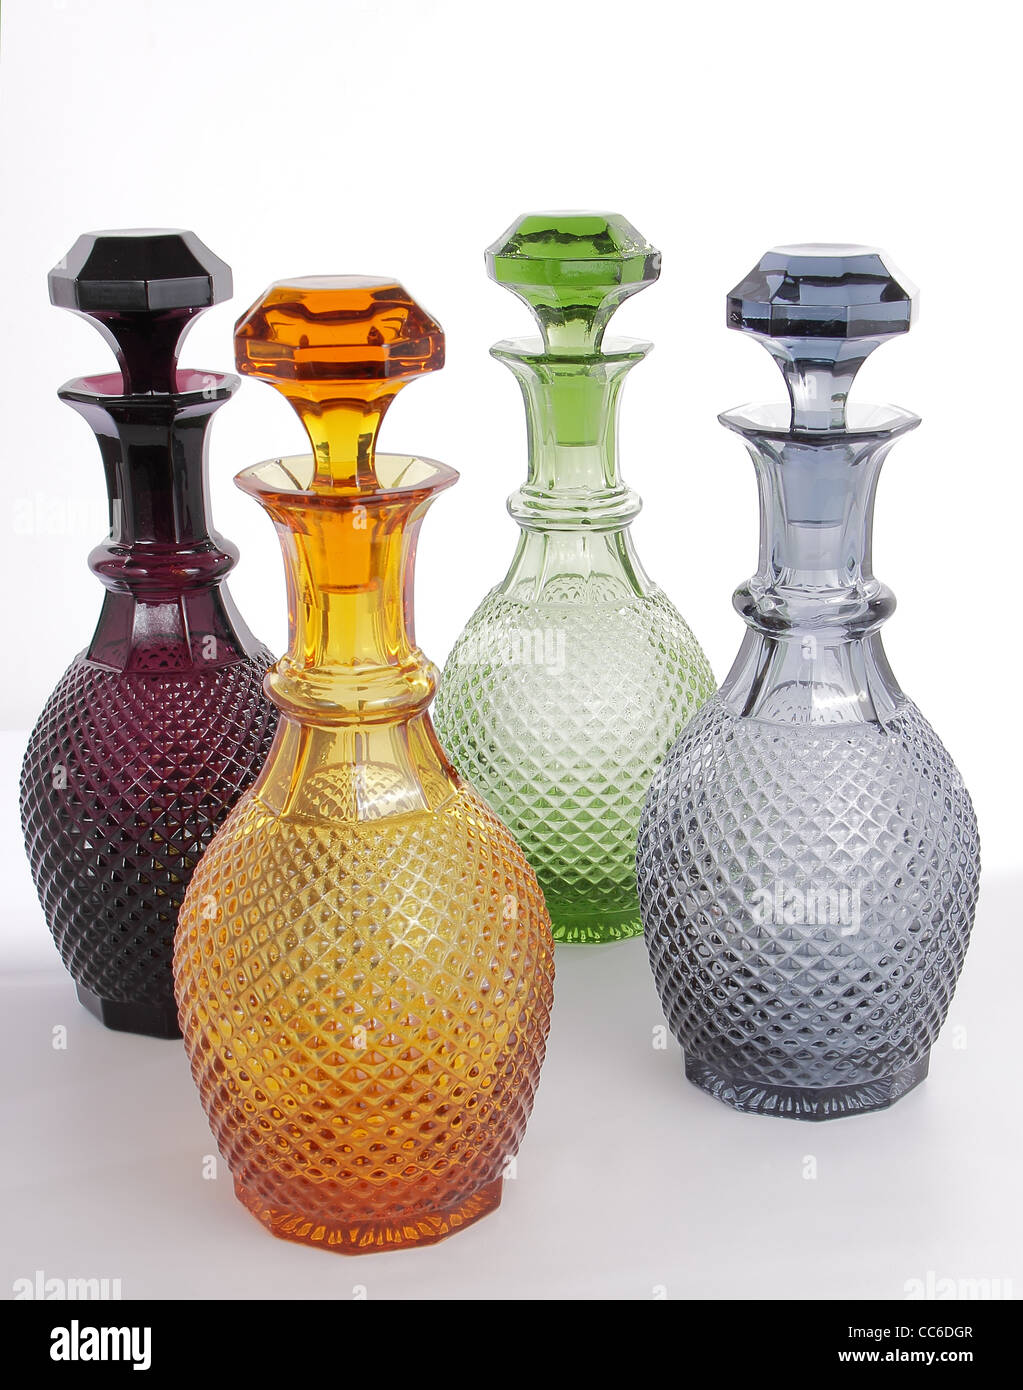 Handmade colored glass decanters Stock Photo